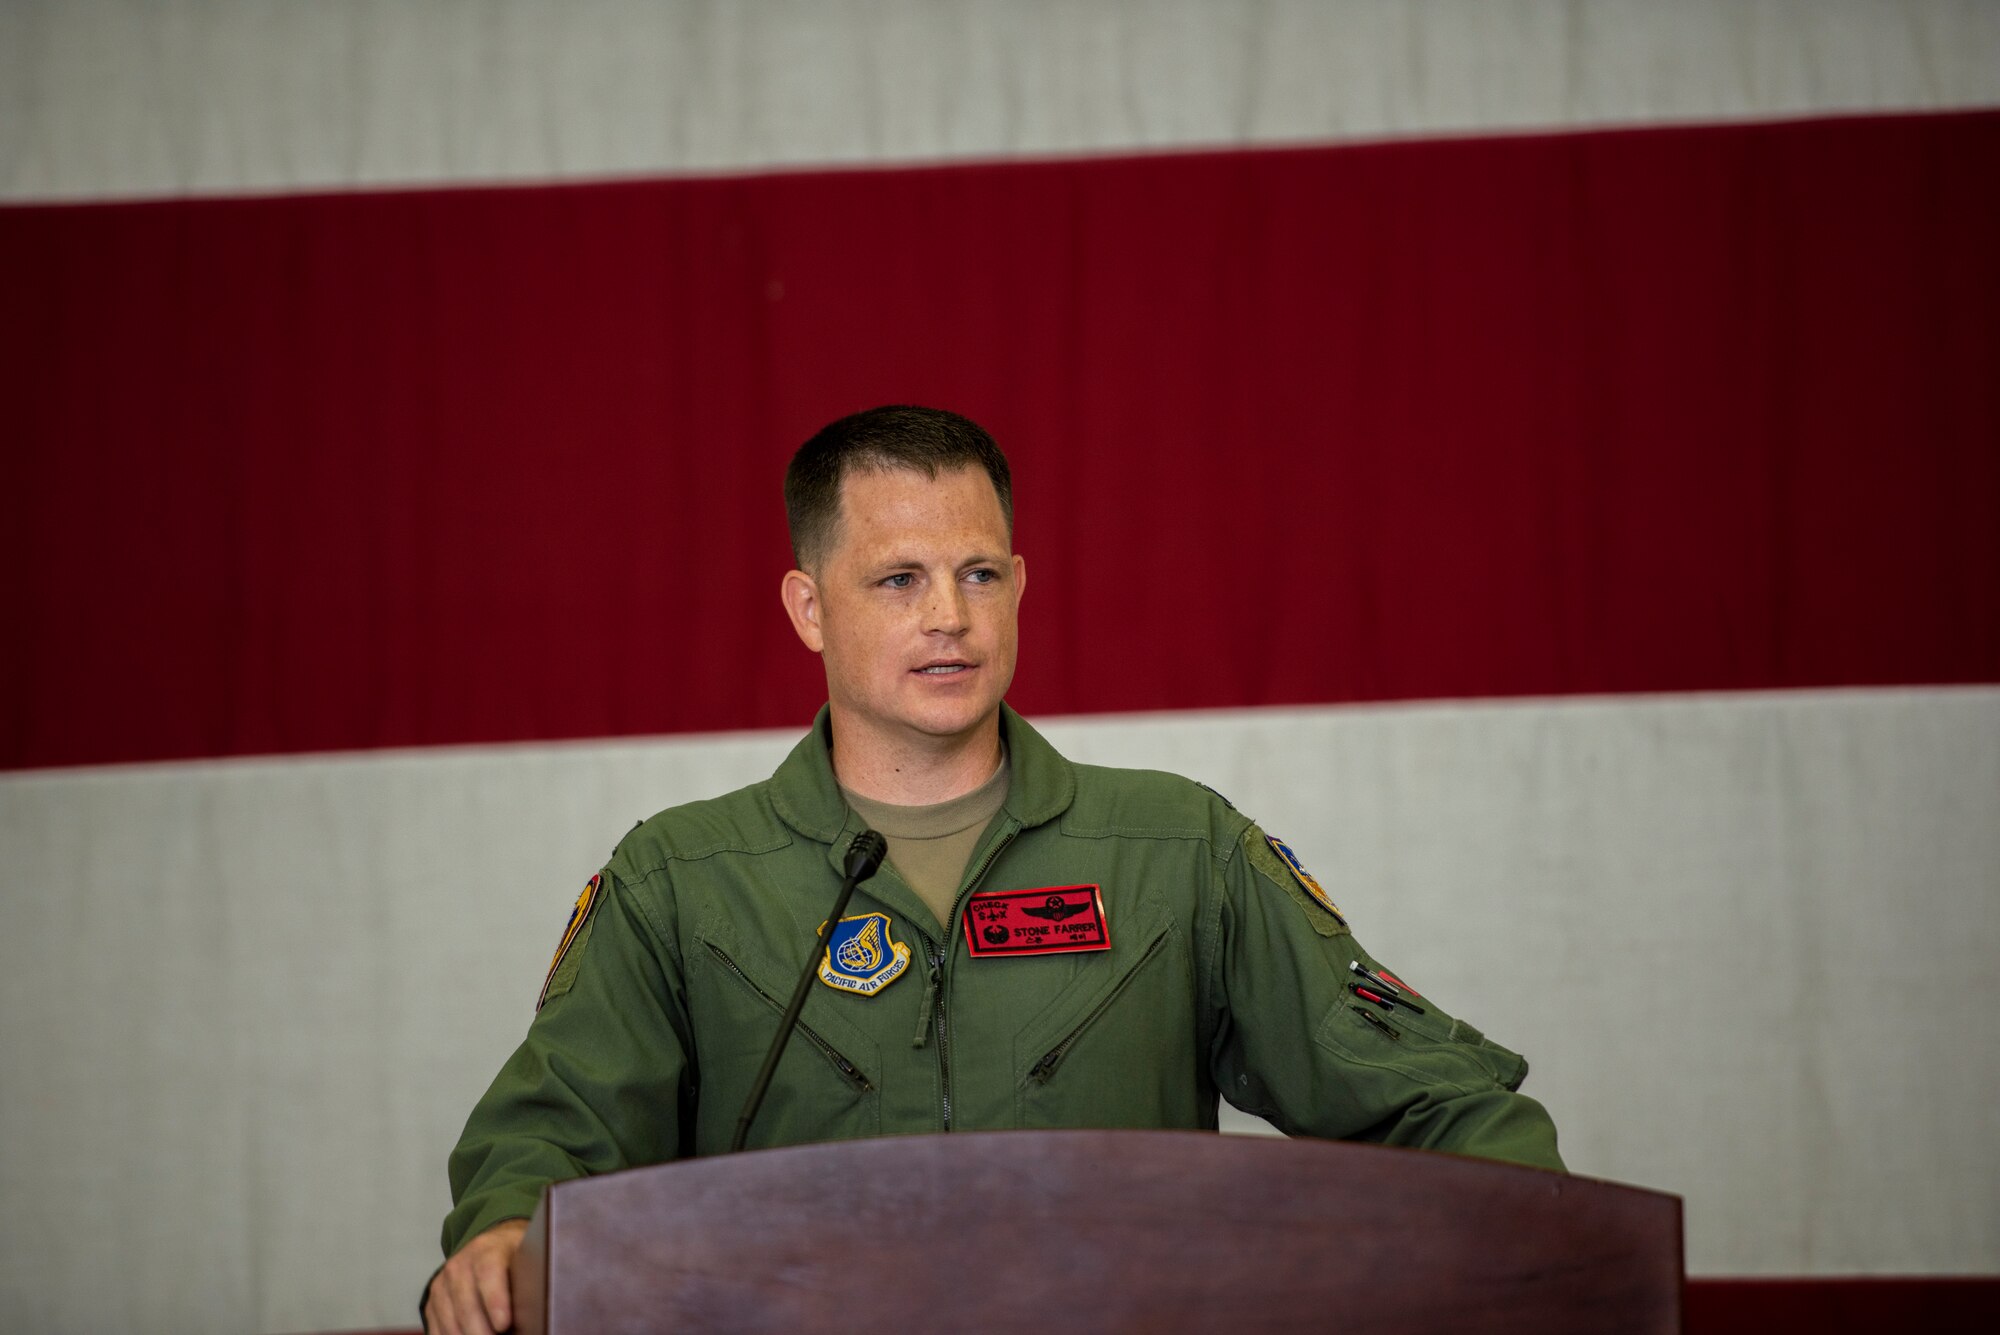 Lt. Col. Cory Farrer, 36th Fighter Squadron newly-appointed commander, addresses the audience after taking command of the FS at Osan Air Base, Republic of Korea, June 30, 2022.